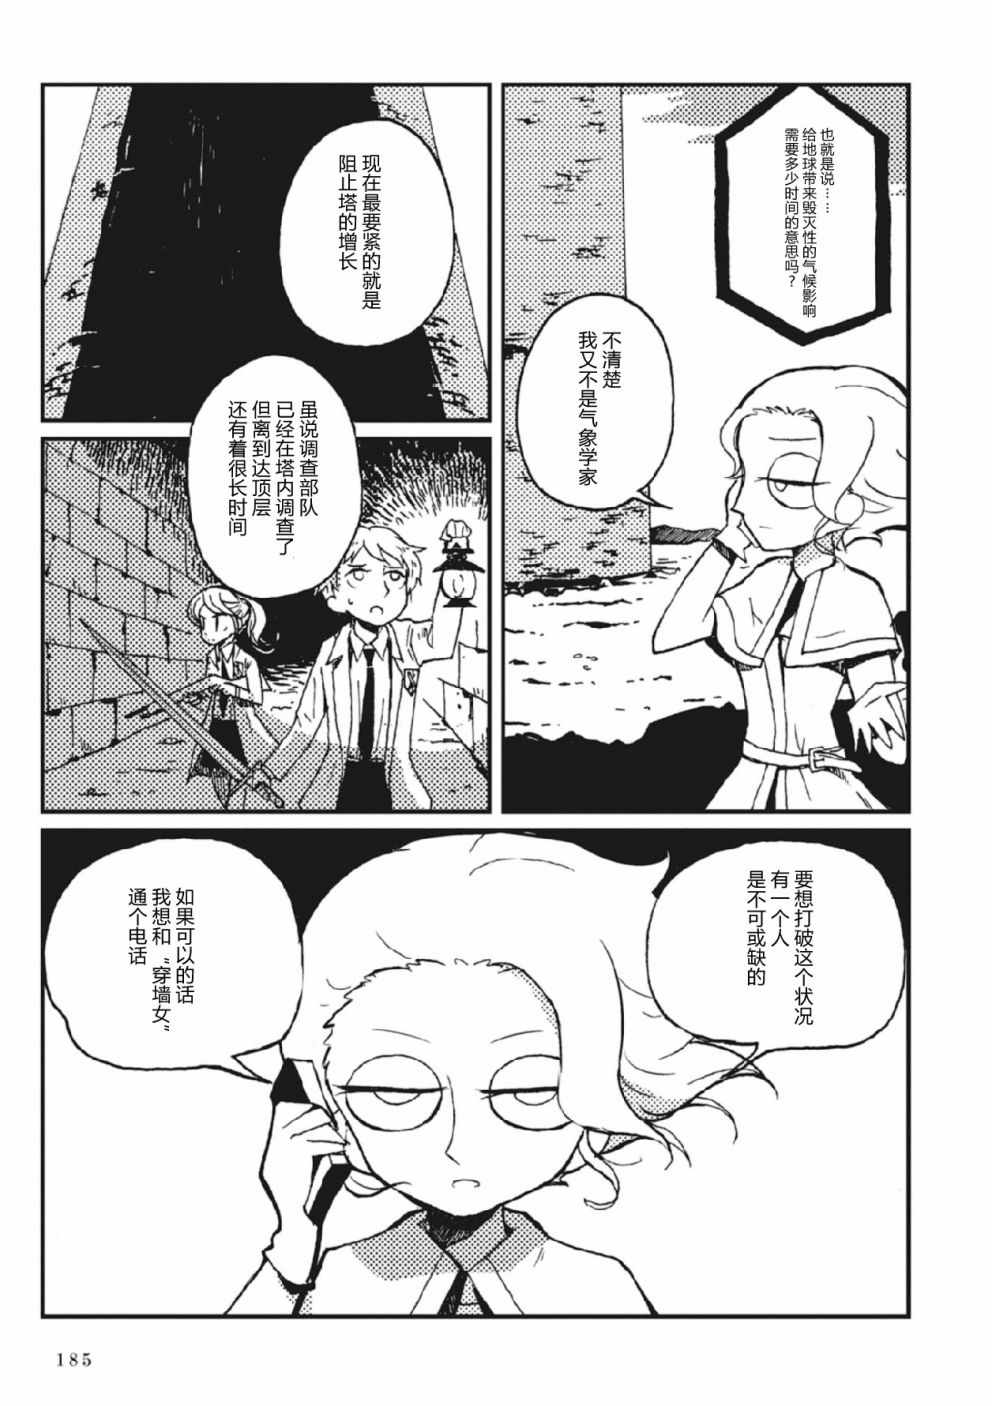 《Spectral Wizard》漫画 003集